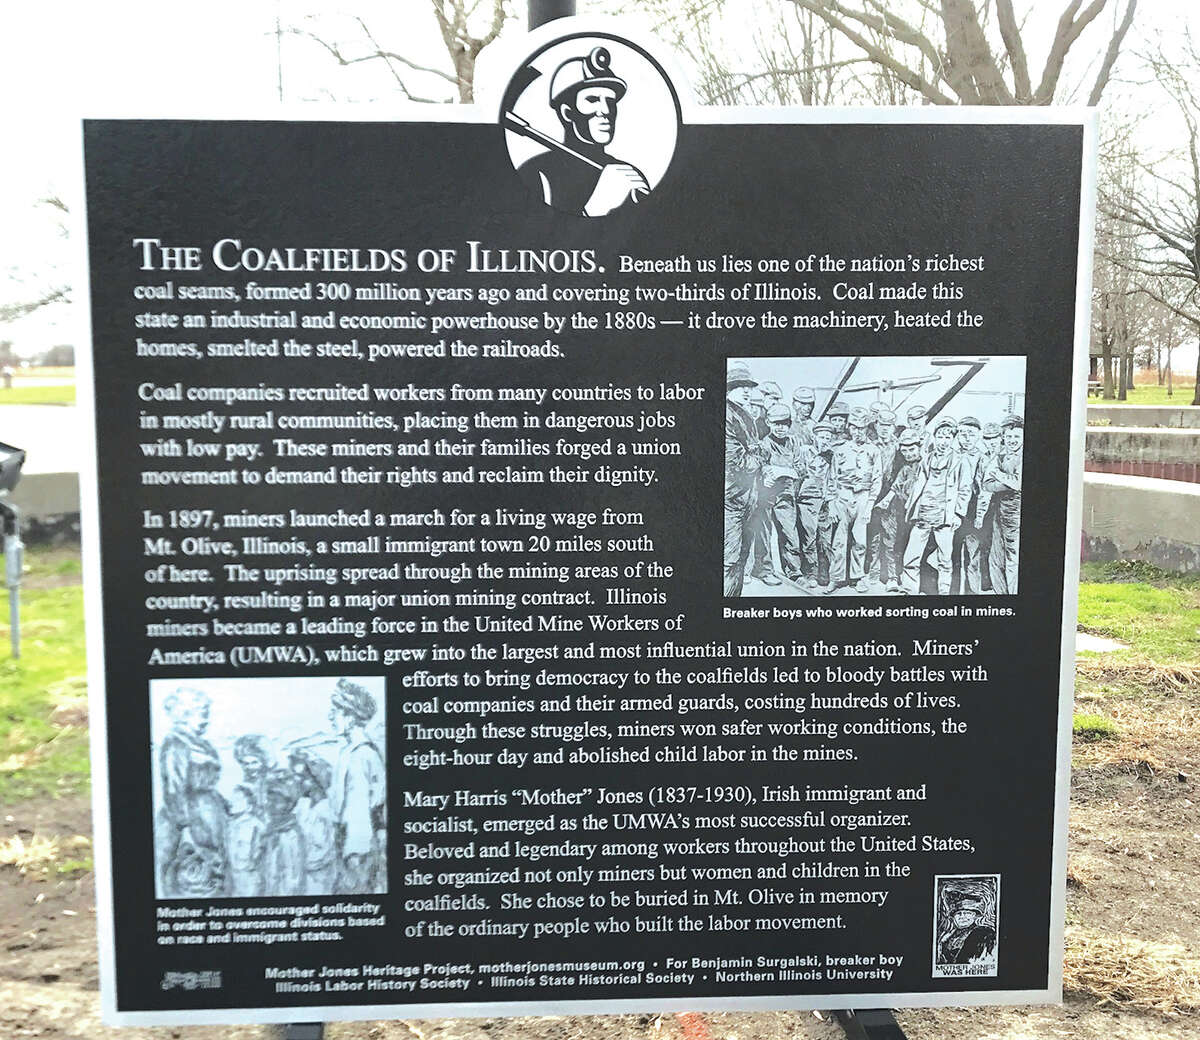 The Mother Jones Heritage Project’s marker at the Coalfield Rest Area on I-55.